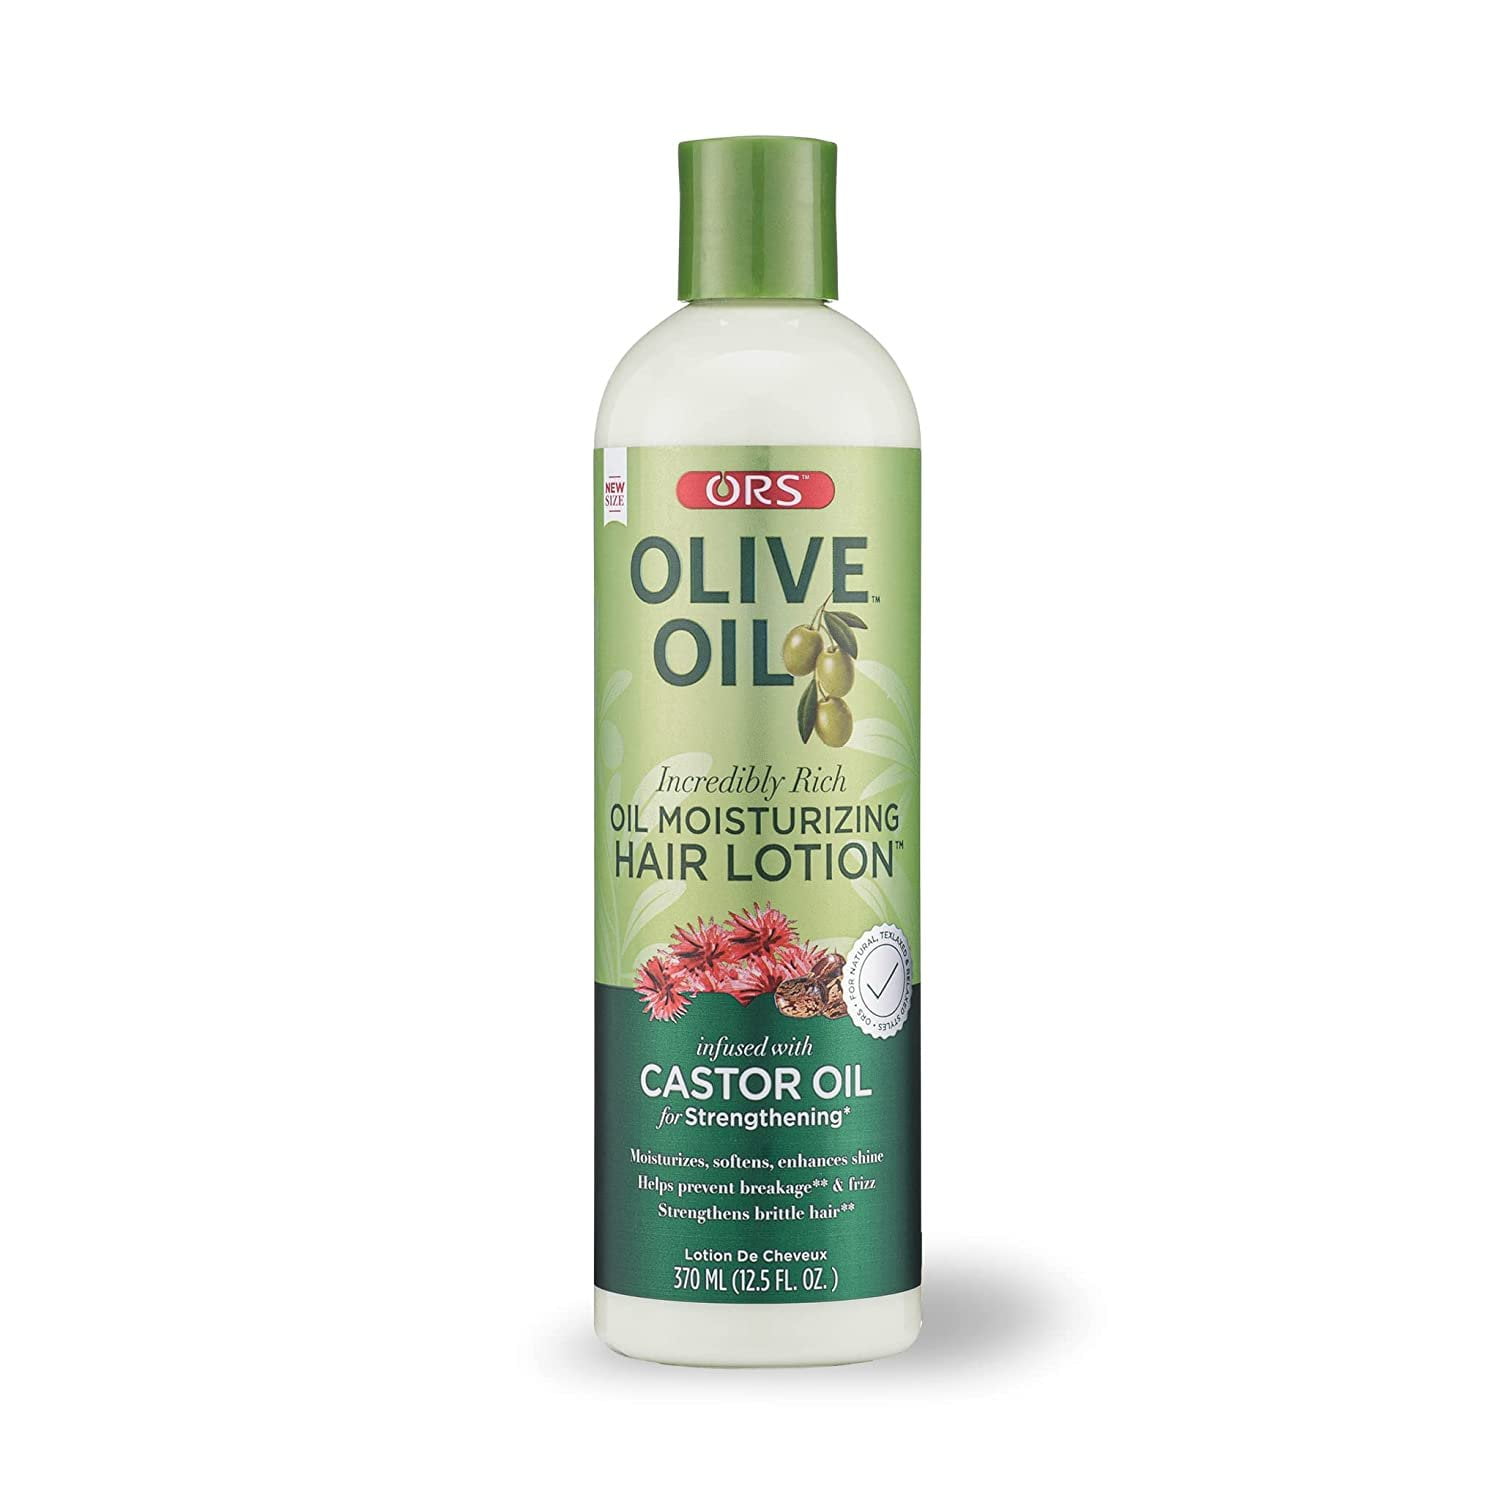 ORS Olive Oil Incredibly Rich Oil Moisturizing Hair Lotion infused with Castor Oil for Strengthening 12.5oz